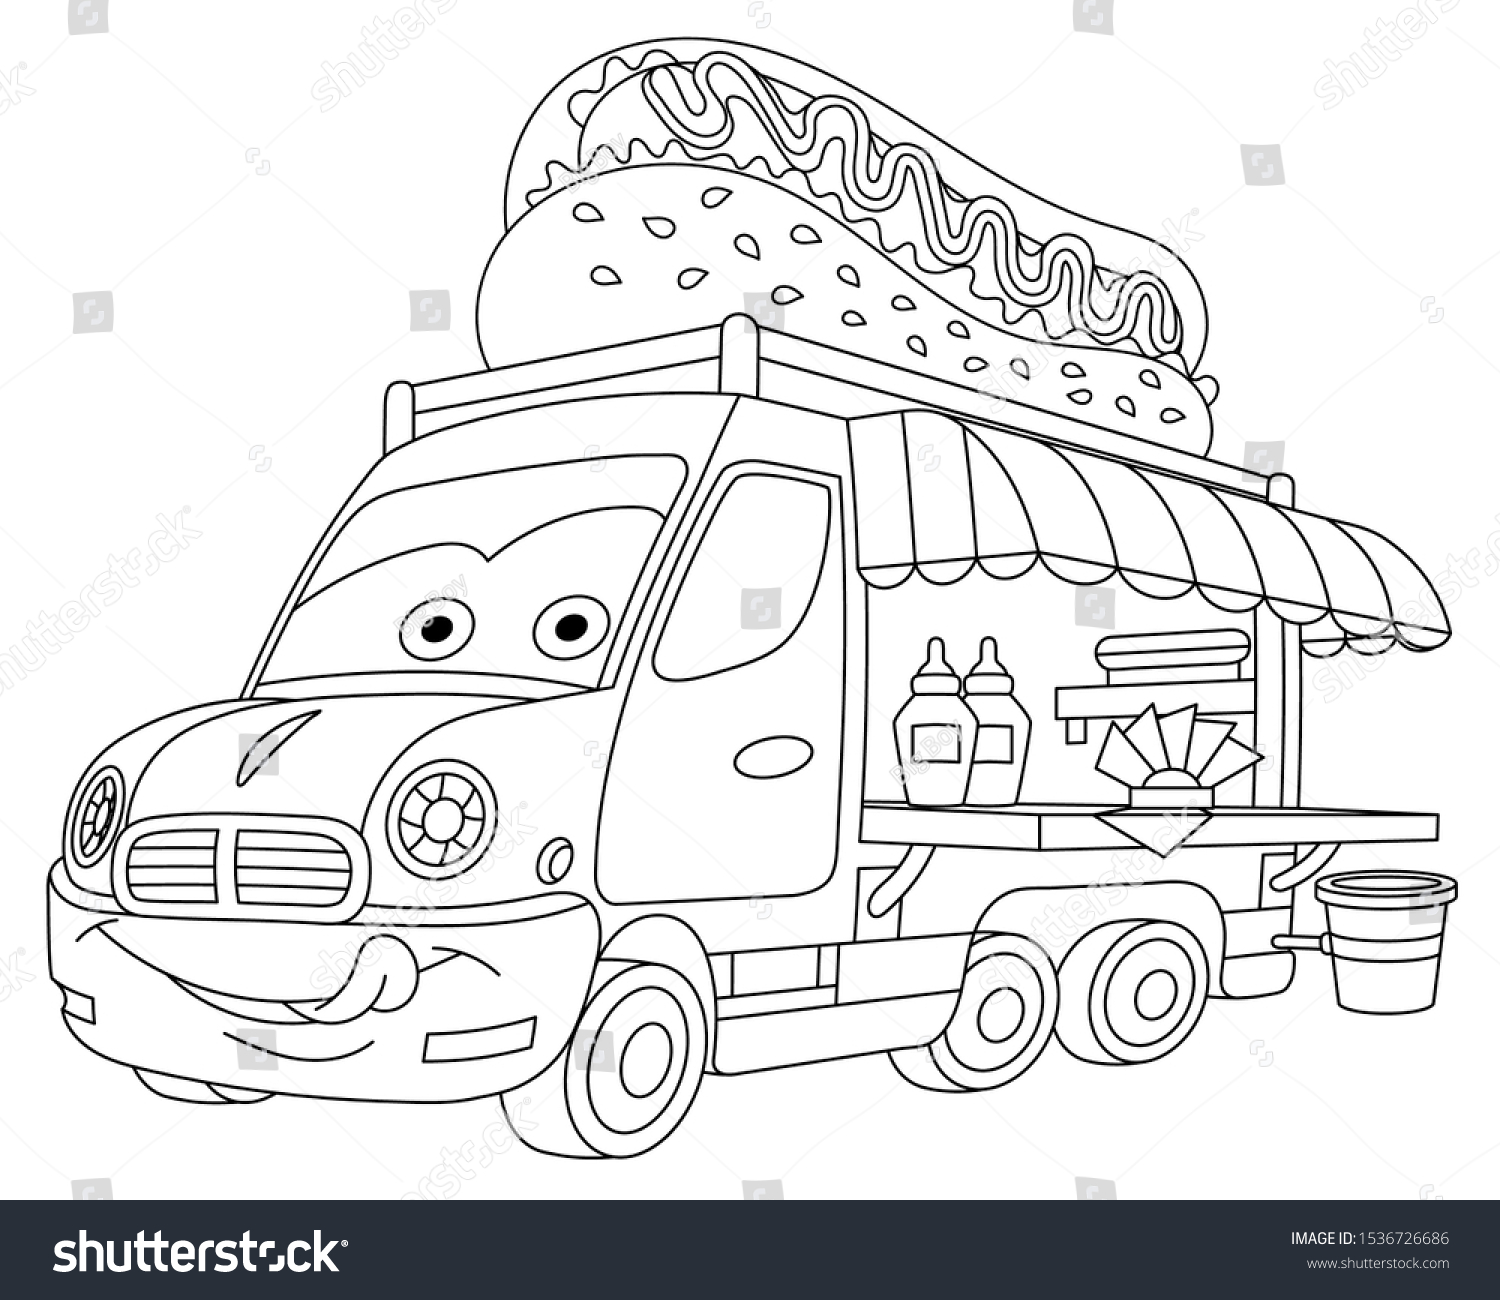 Coloring page coloring picture cartoon food stock vector royalty free